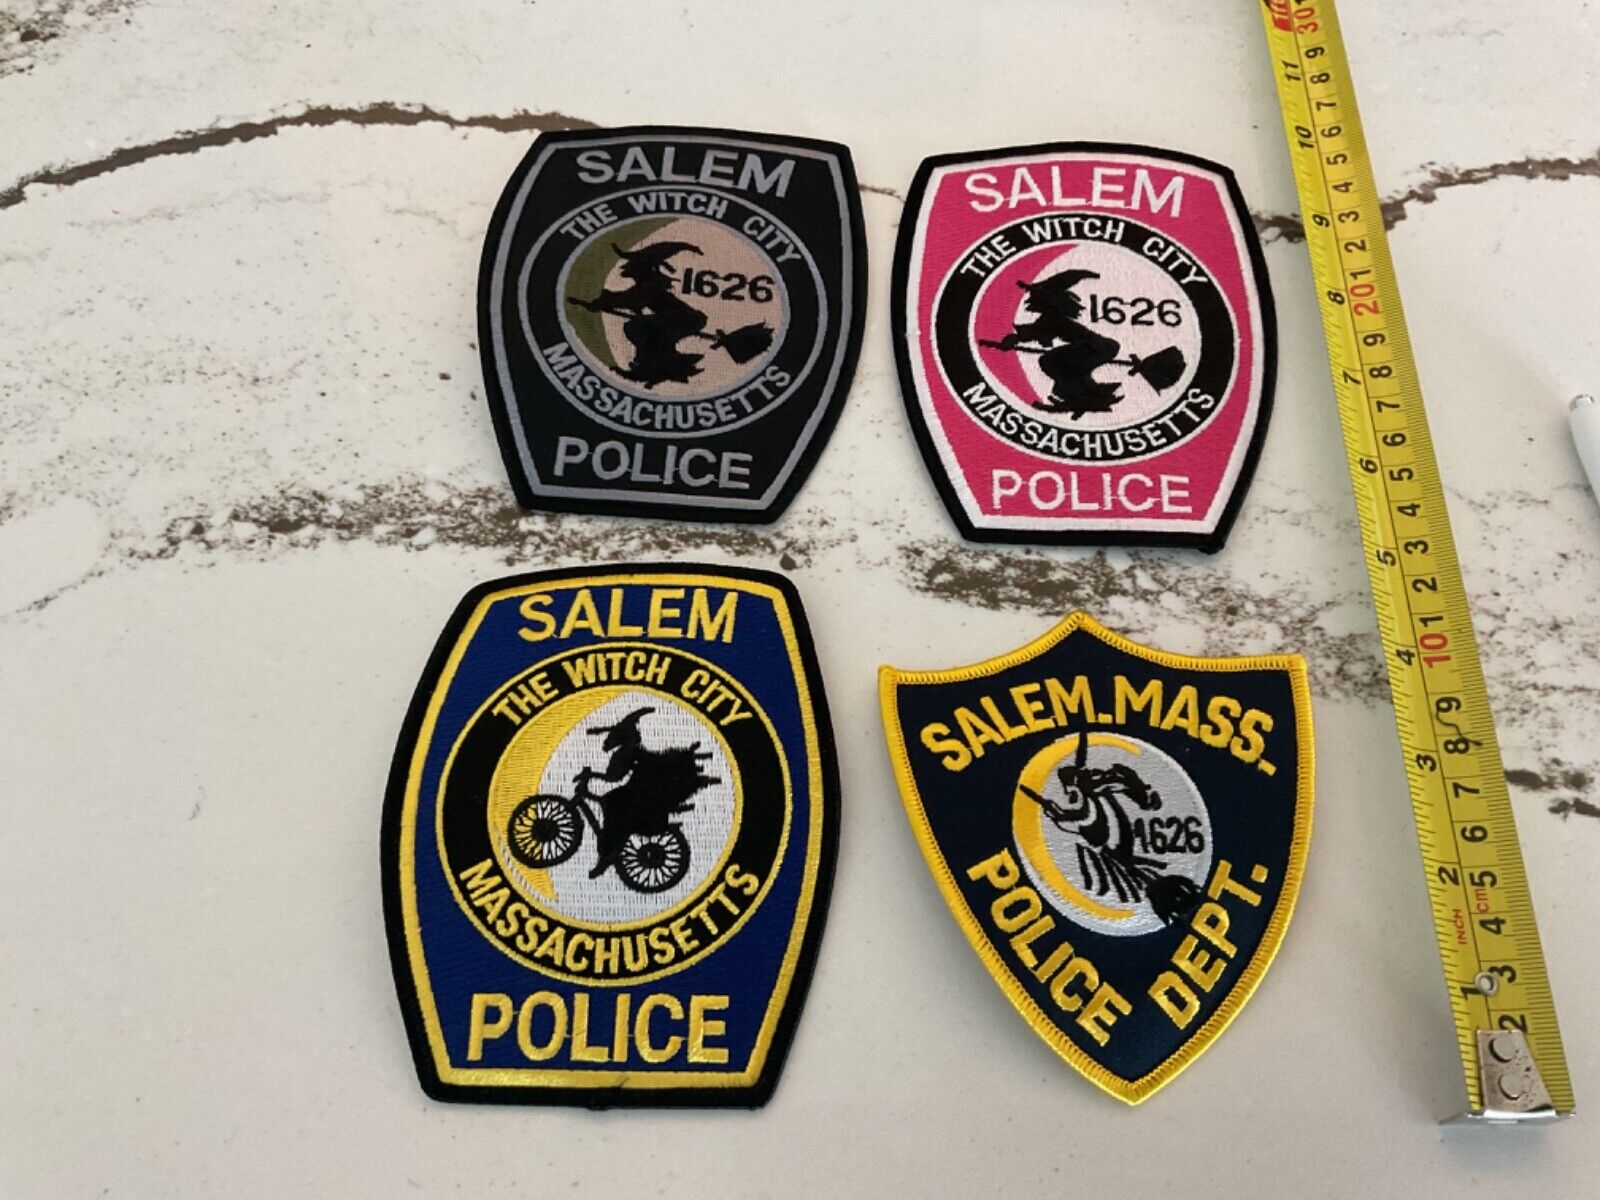 Salem Massachusetts Police Patch collectable Set 4 pieces full size